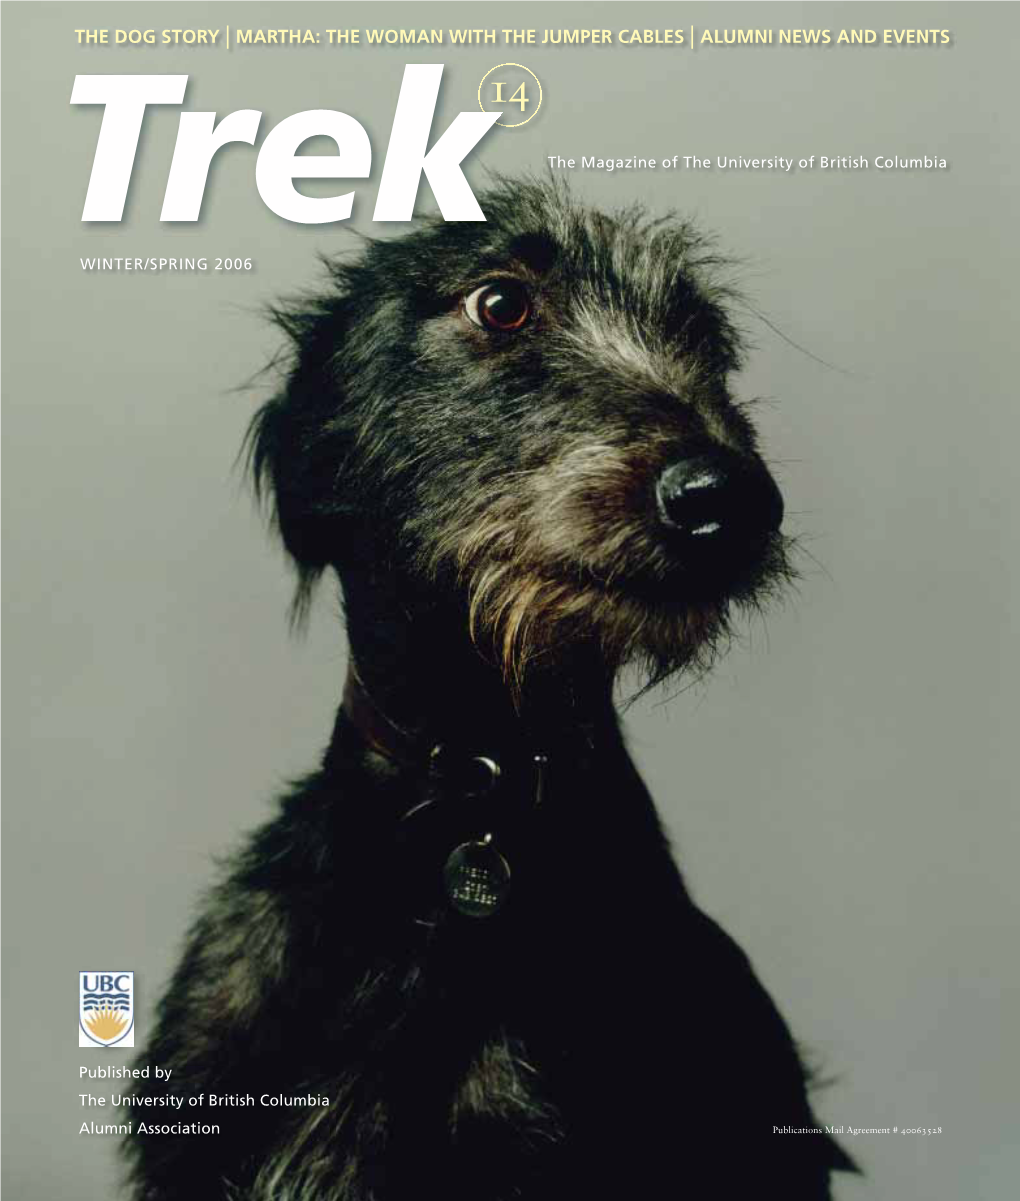 THE DOG STORY | MARTHA: the WOMAN with the JUMPER CABLES | ALUMNI NEWS and EVENTS 14 Trek the Magazine of the University of British Columbia WINTER/SPRING 2006